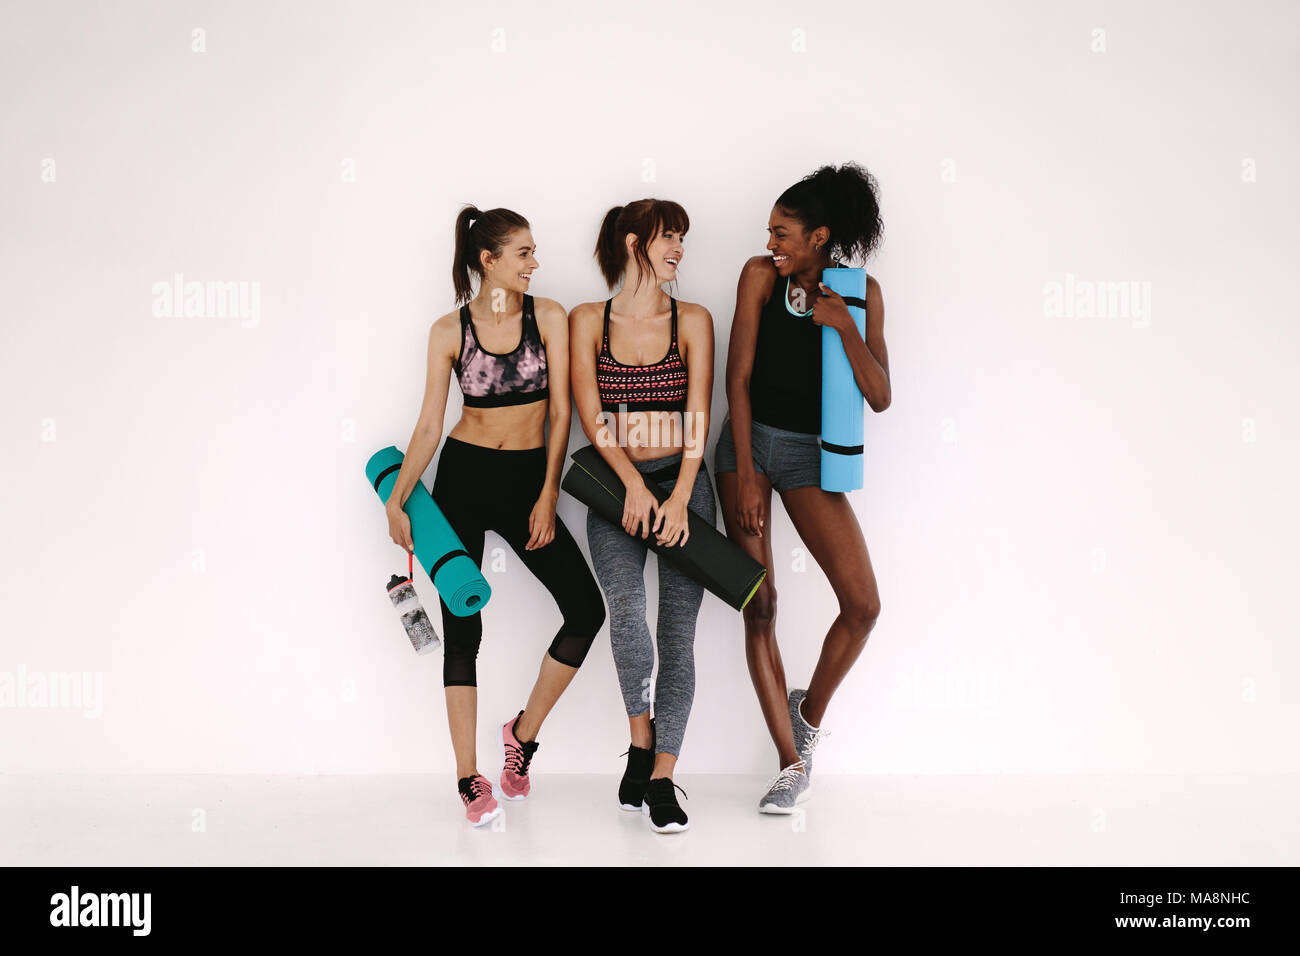 Group of female friends in sportswear smiling together while standing in a gym after yoga workout. Women standing by a wall with exercise mat. Stock Photo